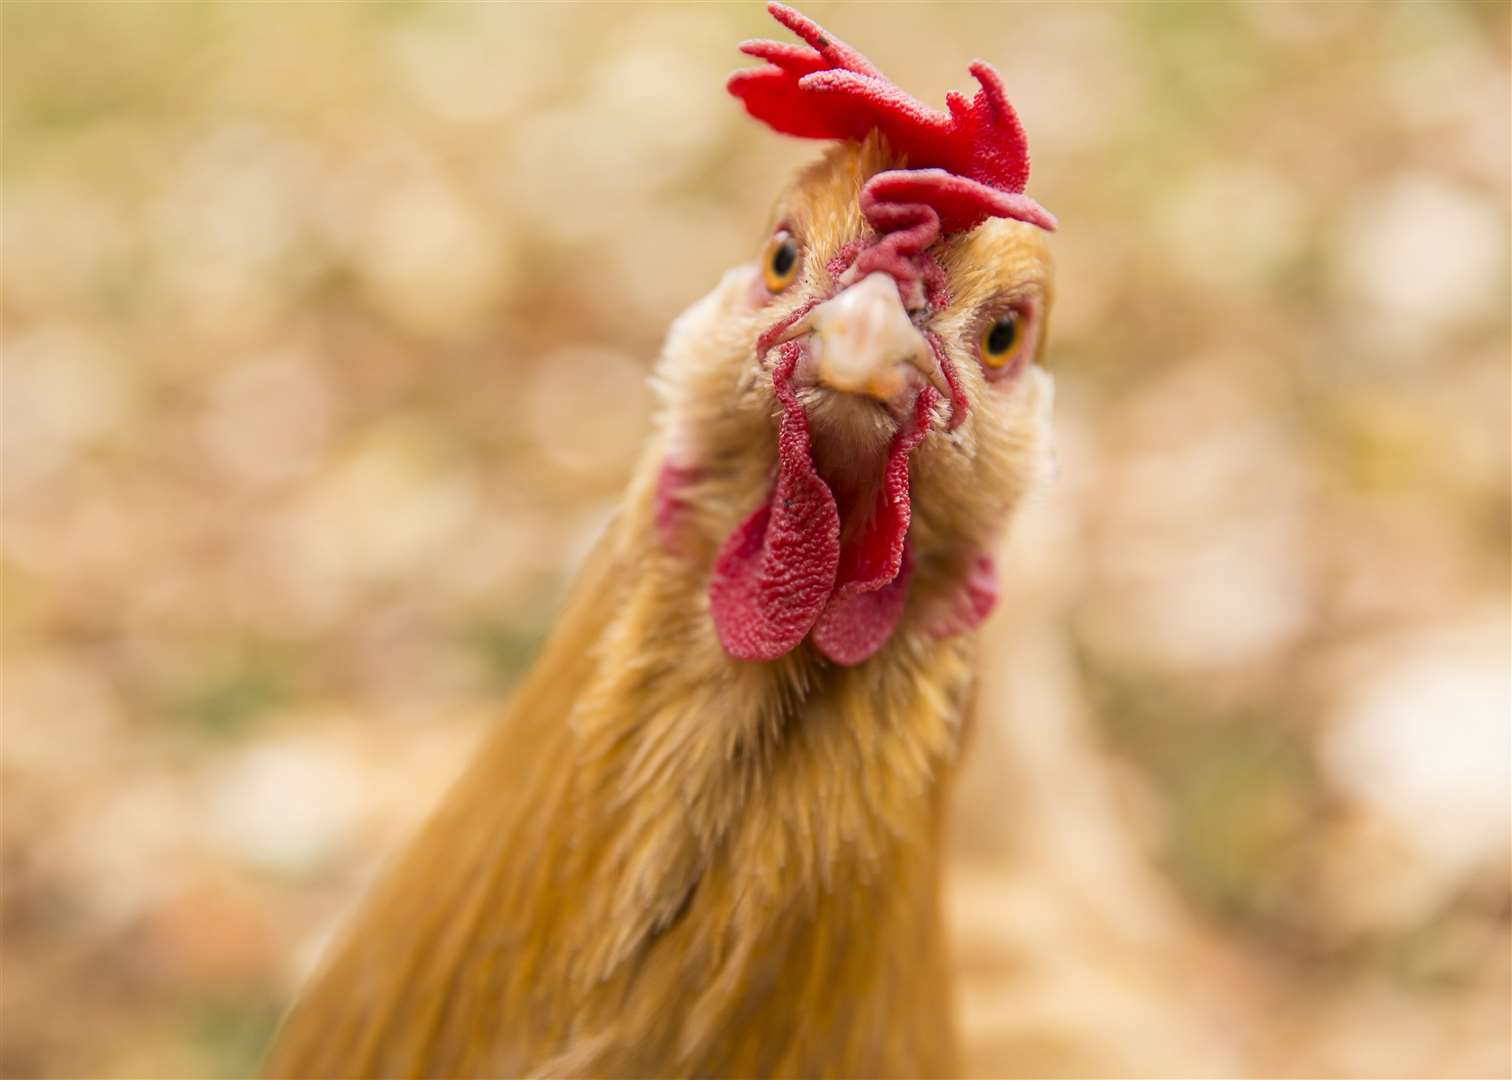 The RSPCA fears rescue centres could be overrun with chickens